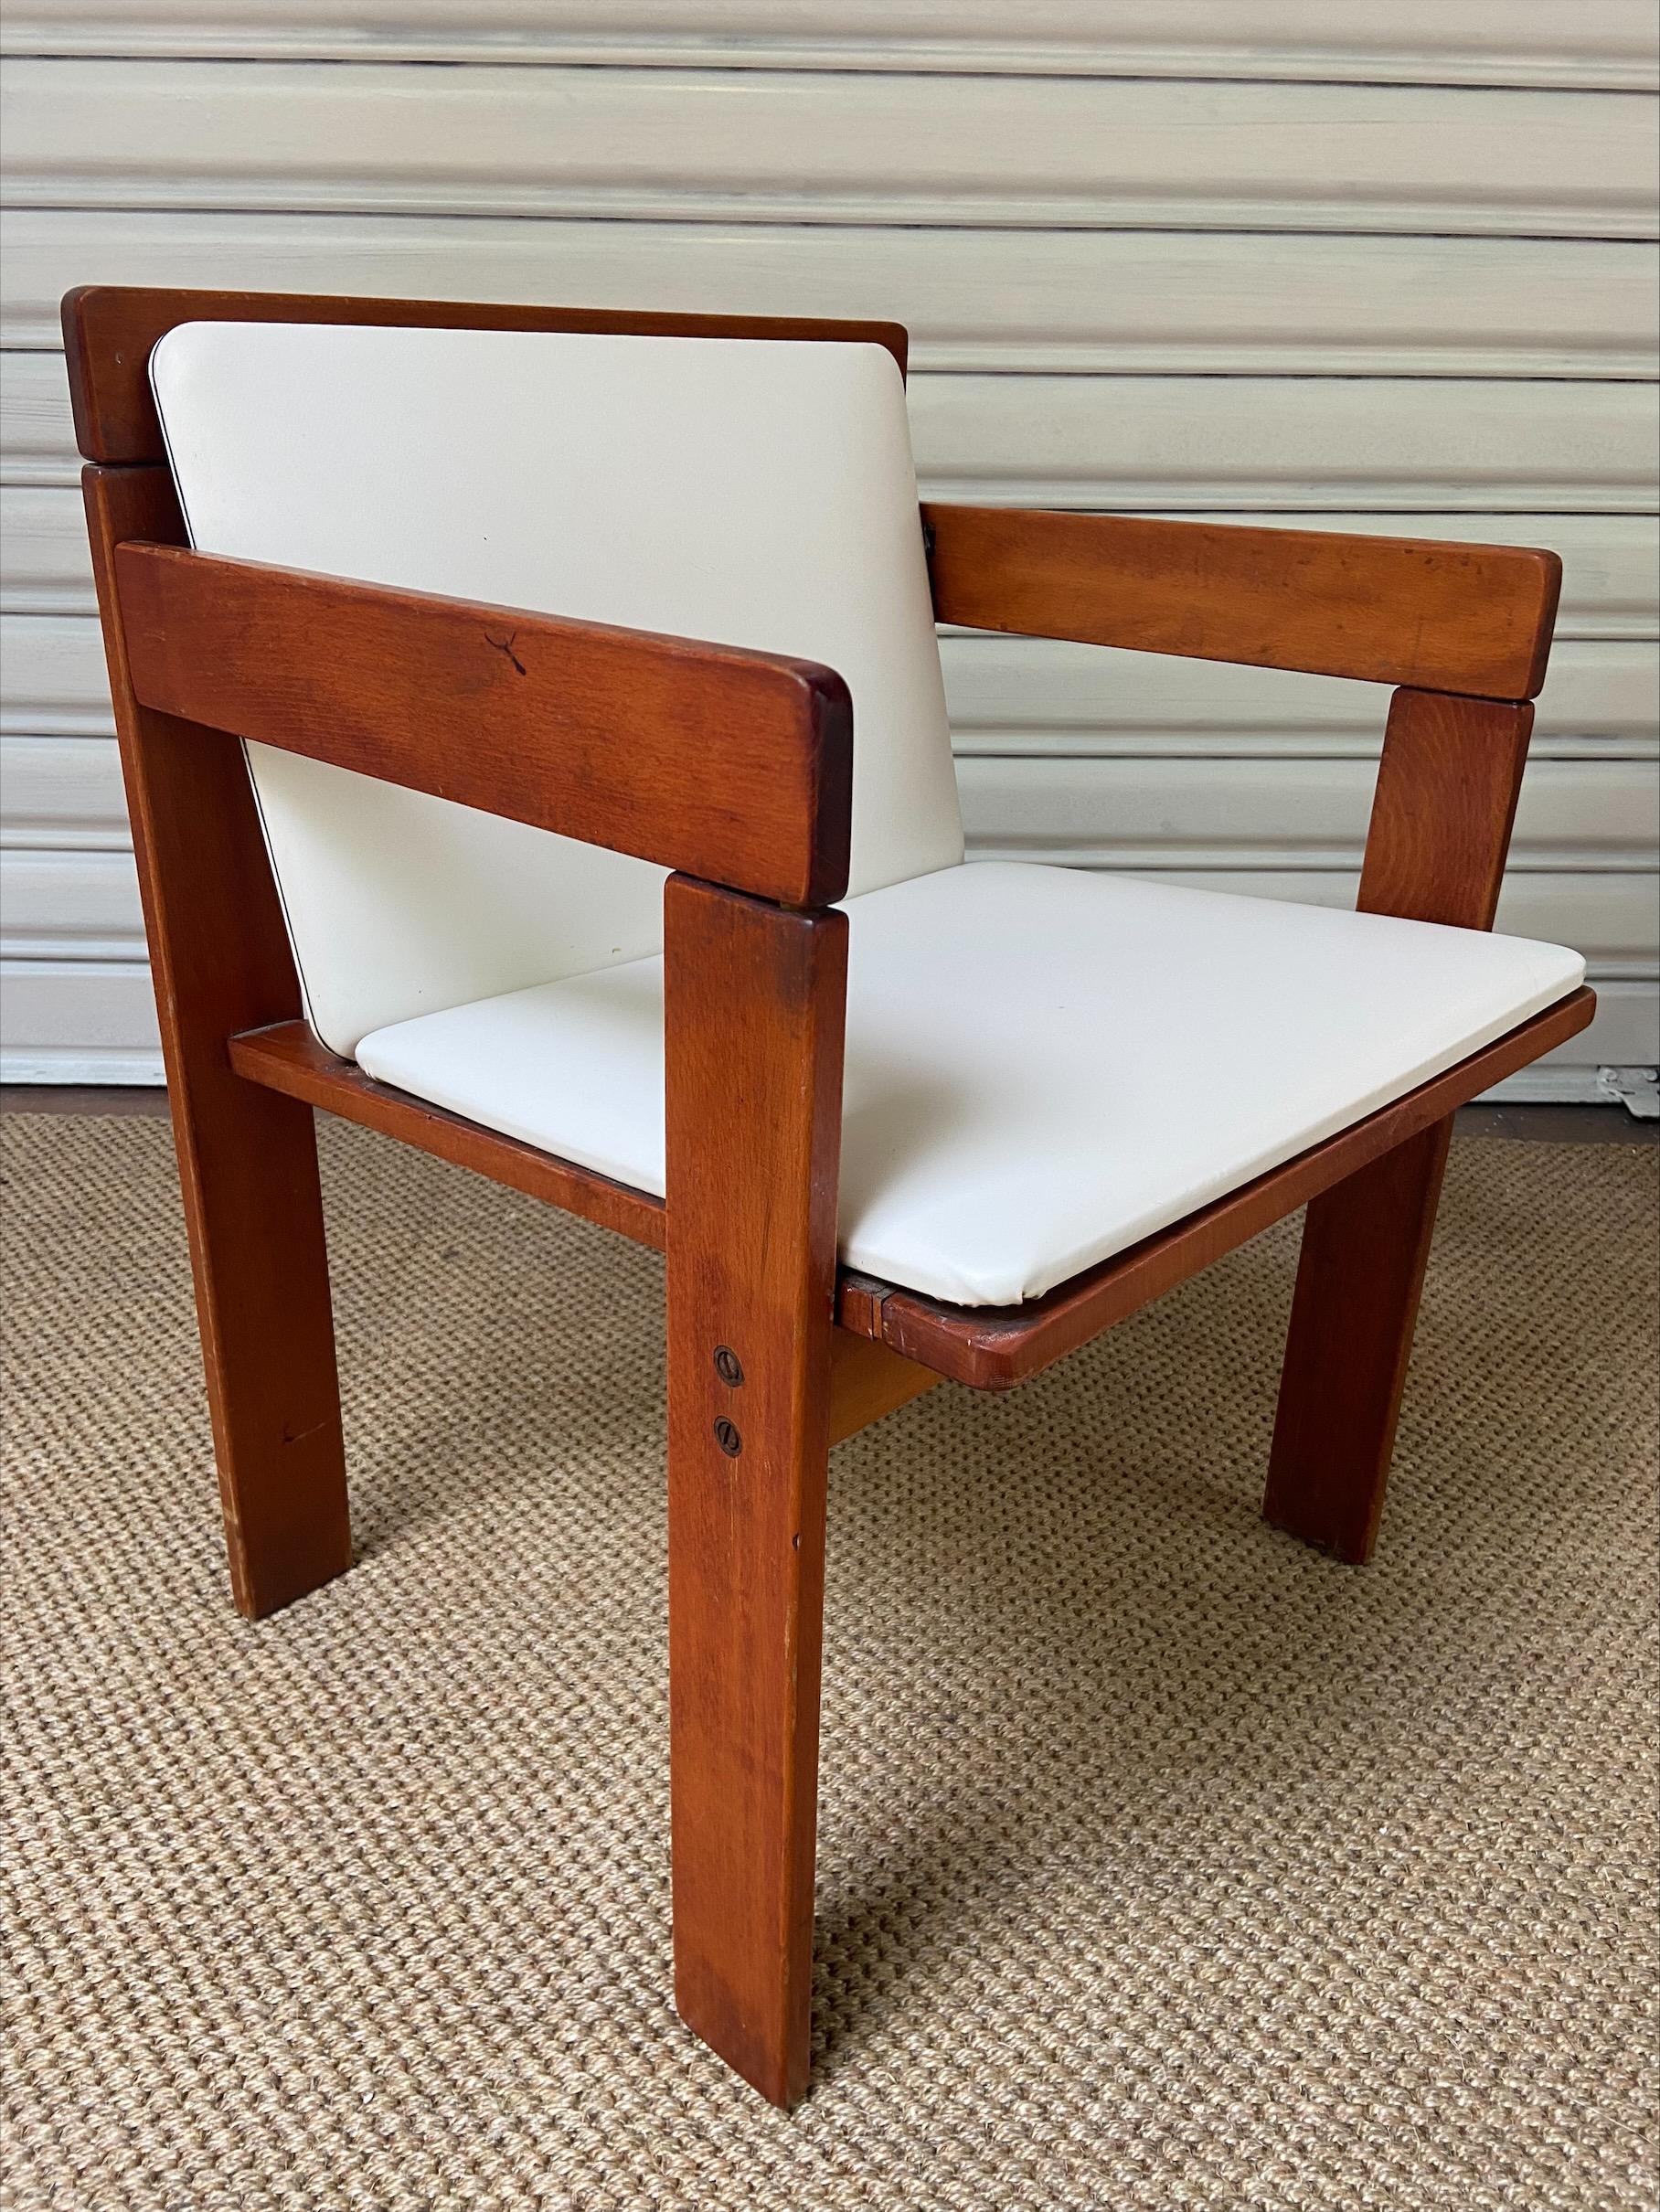 4 armchairs - Reguitti Edition
Wood and white leatherette

1972

Measures: H 70 x W 52 x D 52cm

Seat height: 43cm

The publisher's label is on each armchair.